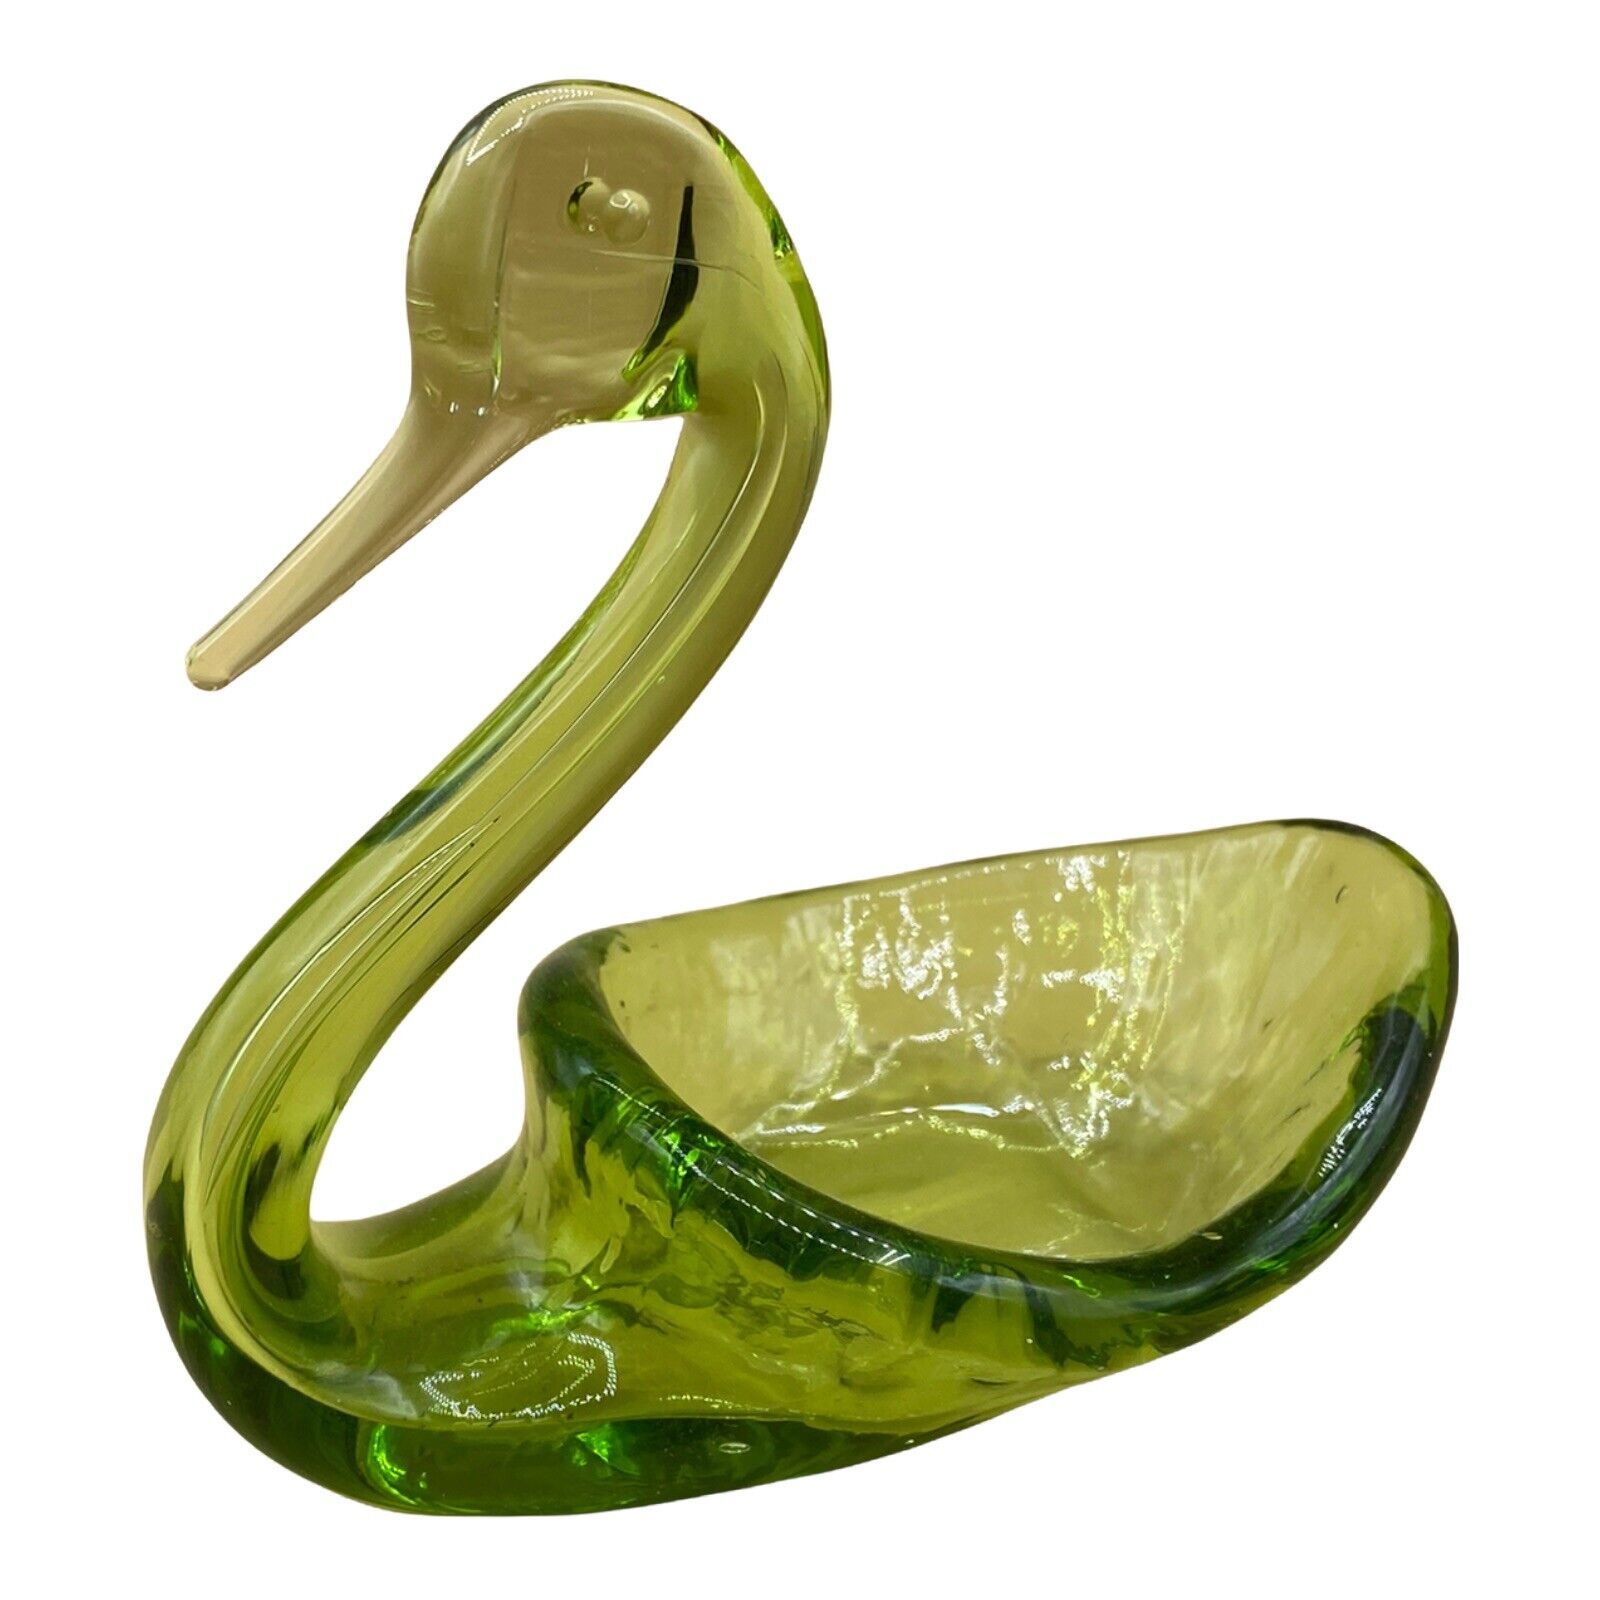 Primary image for Vintage Art Green Glass 5” Swan Candy Trinket Bowl Dish Viking Style